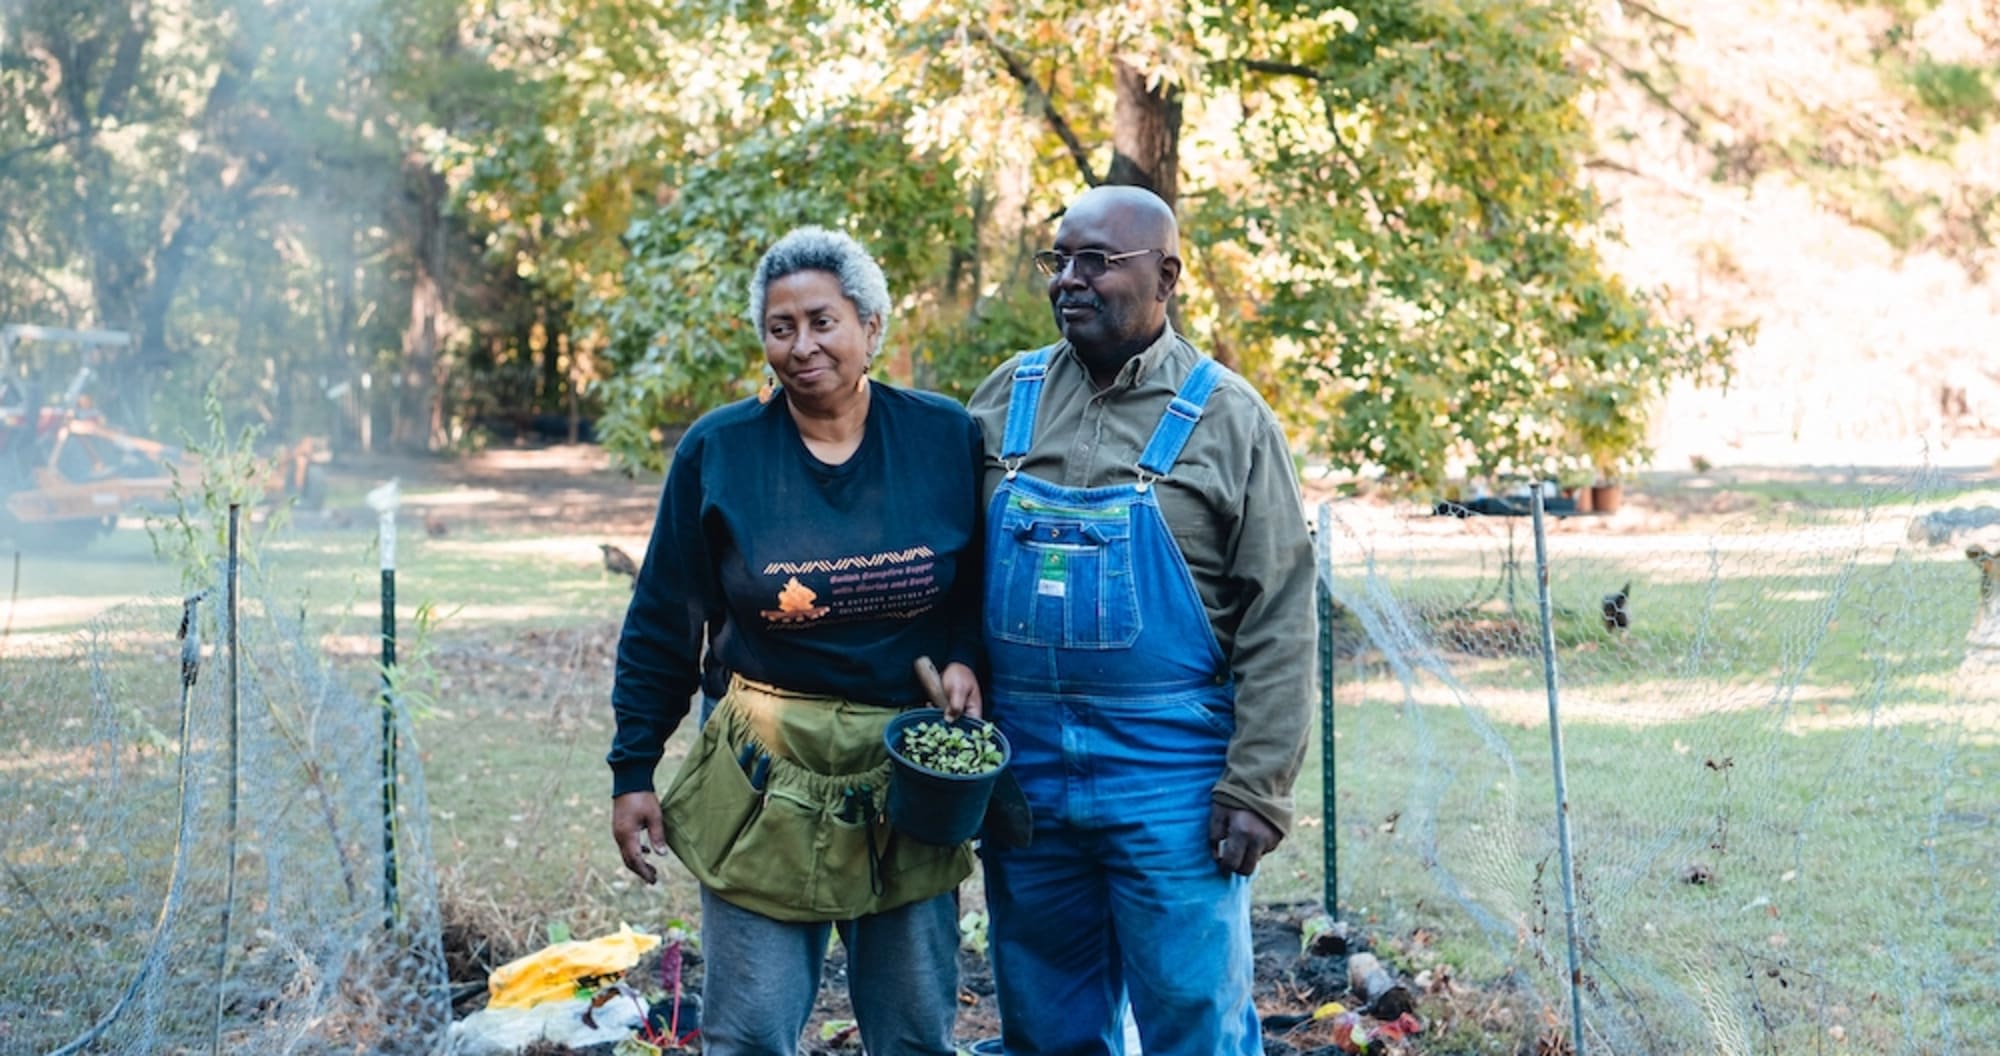 Gullah Culture, Sustainable Agriculture, and Black History Intersect at This South Carolina Farm